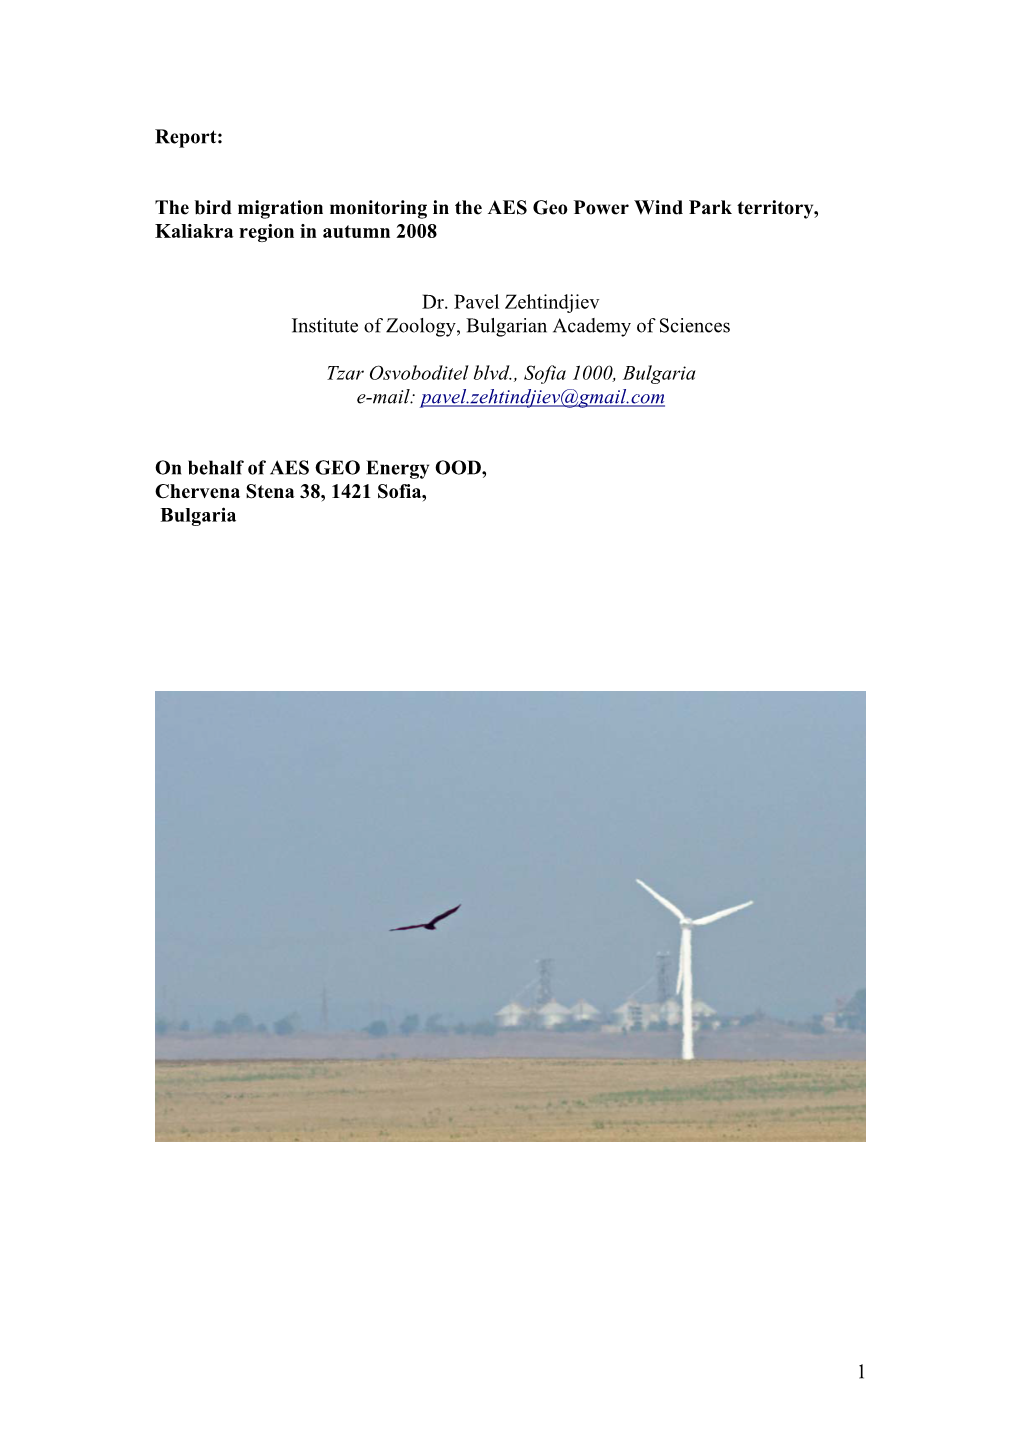 1 Report: the Bird Migration Monitoring in the AES Geo Power